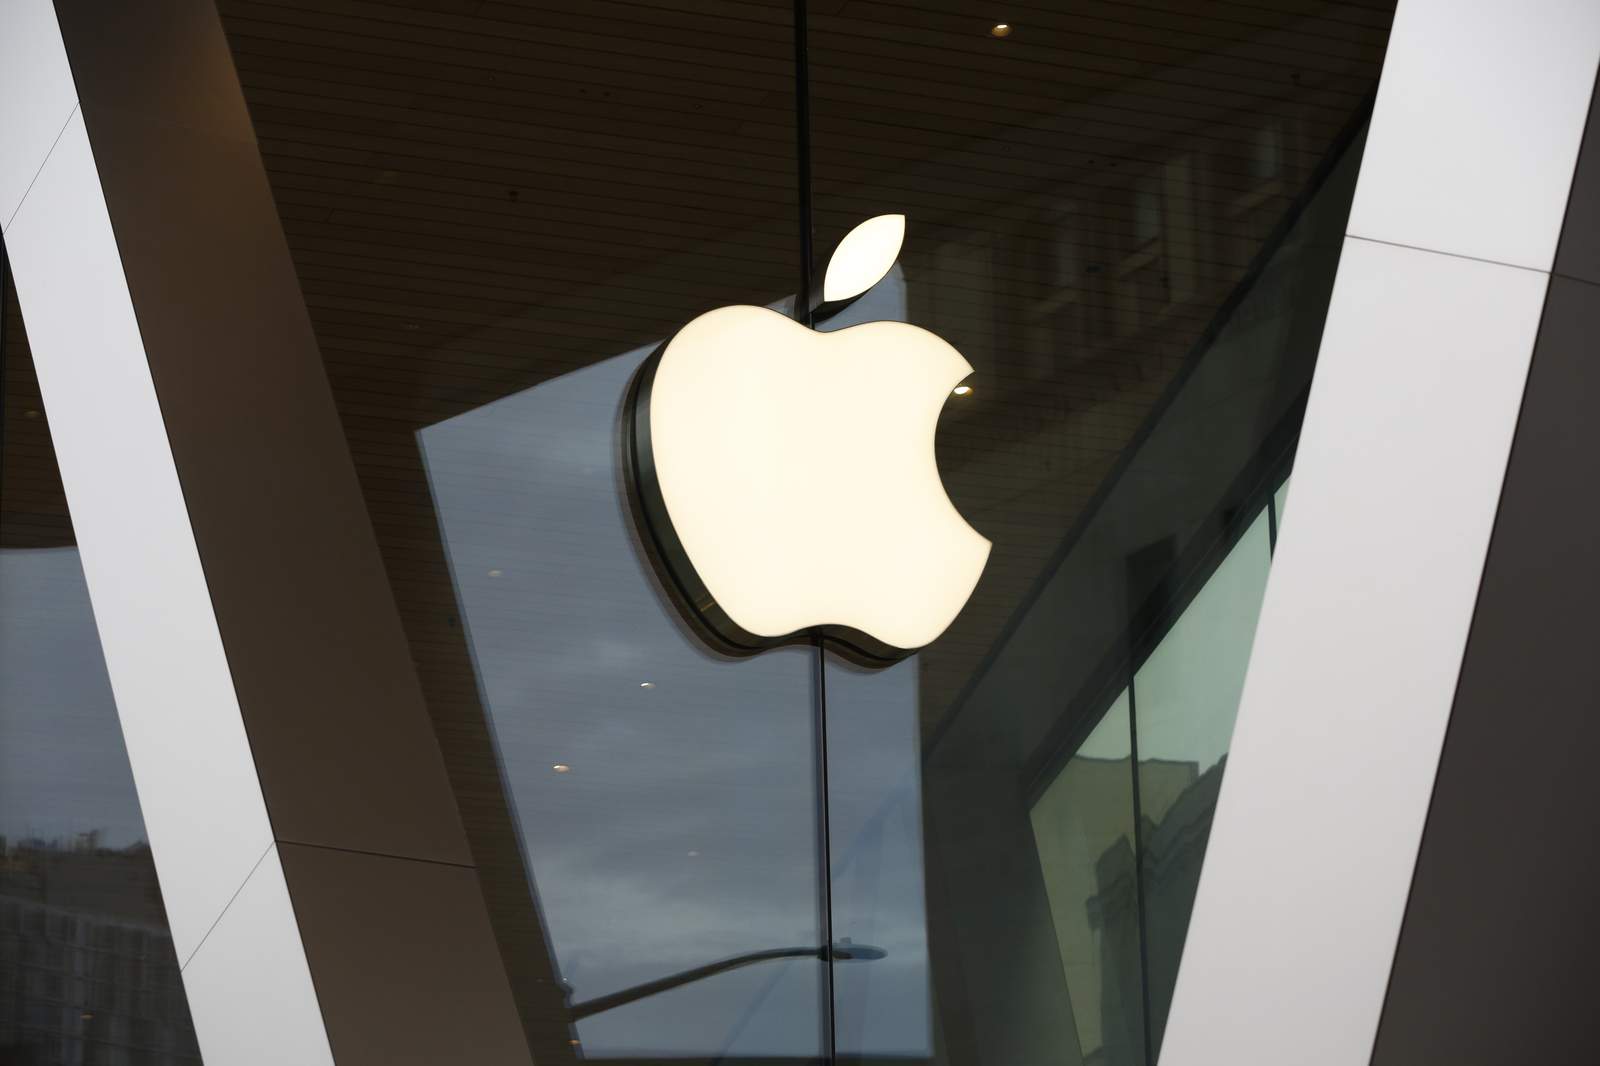 French authorities fine Apple $1.2 billion over anti-competitive practices